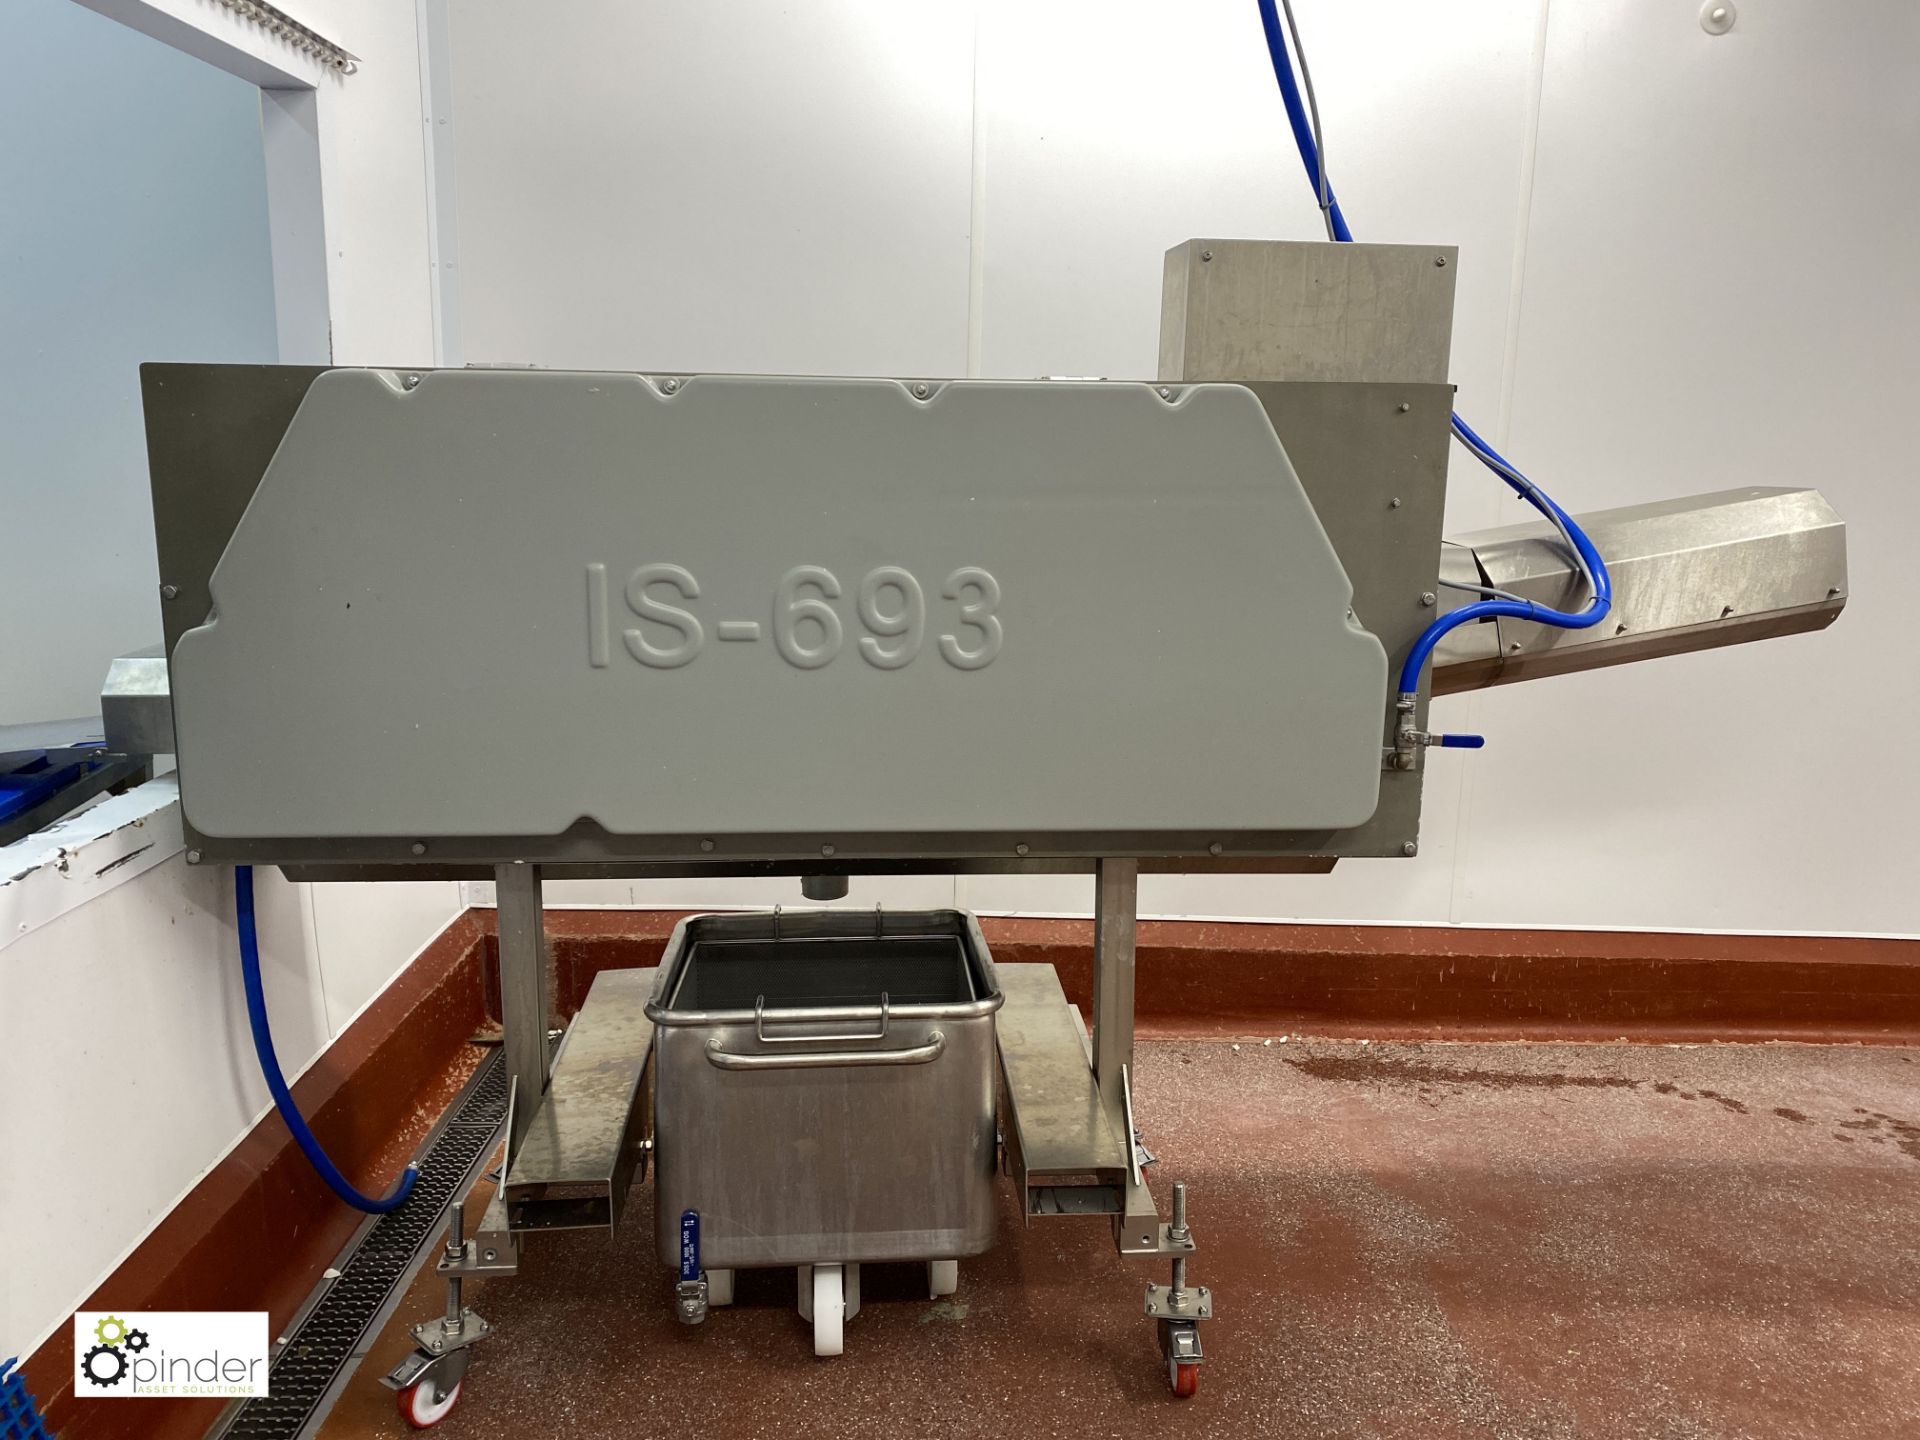 Baader Island IS-693 high speed Fish Descaler used for salmon, year 2019, serial number 49-693-01 ( - Image 2 of 19